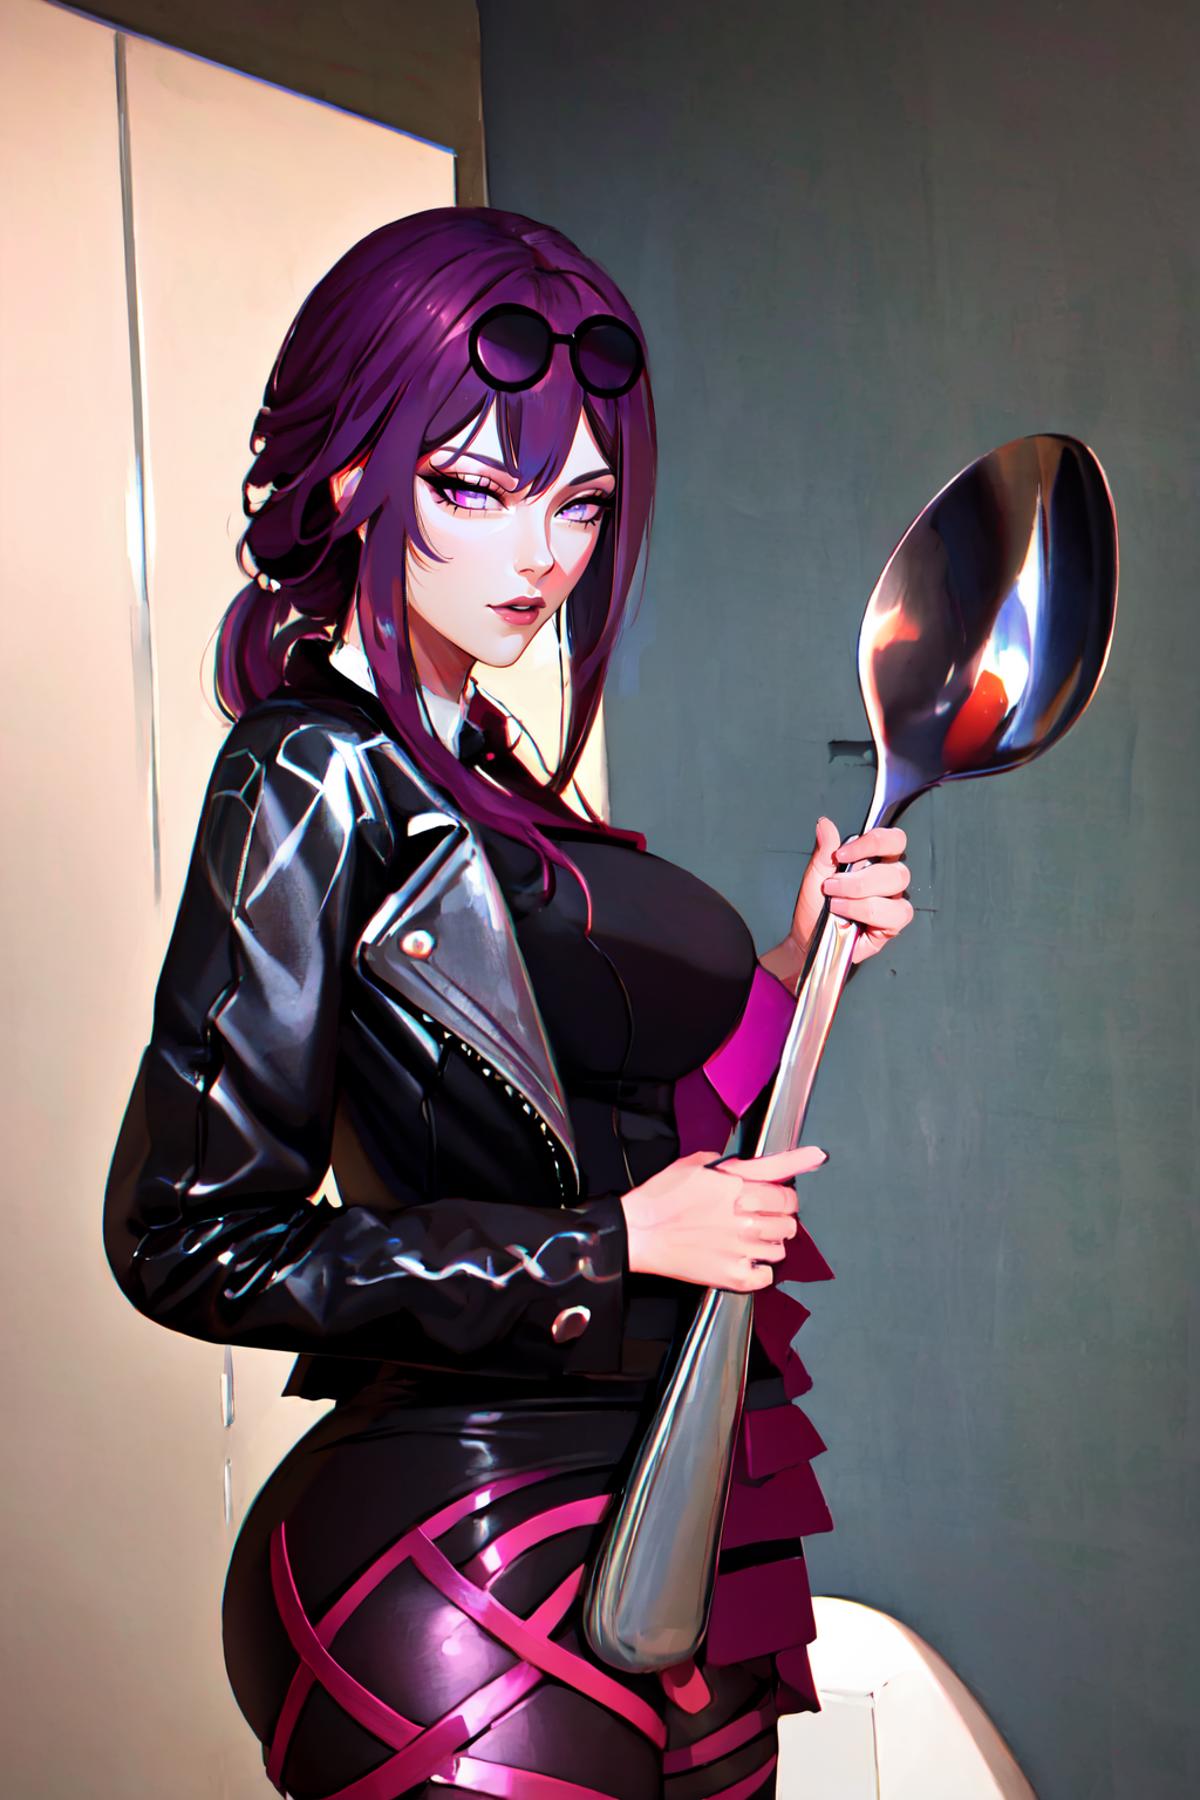 Comically Large Spoon | Concept LoRA image by FallenIncursio